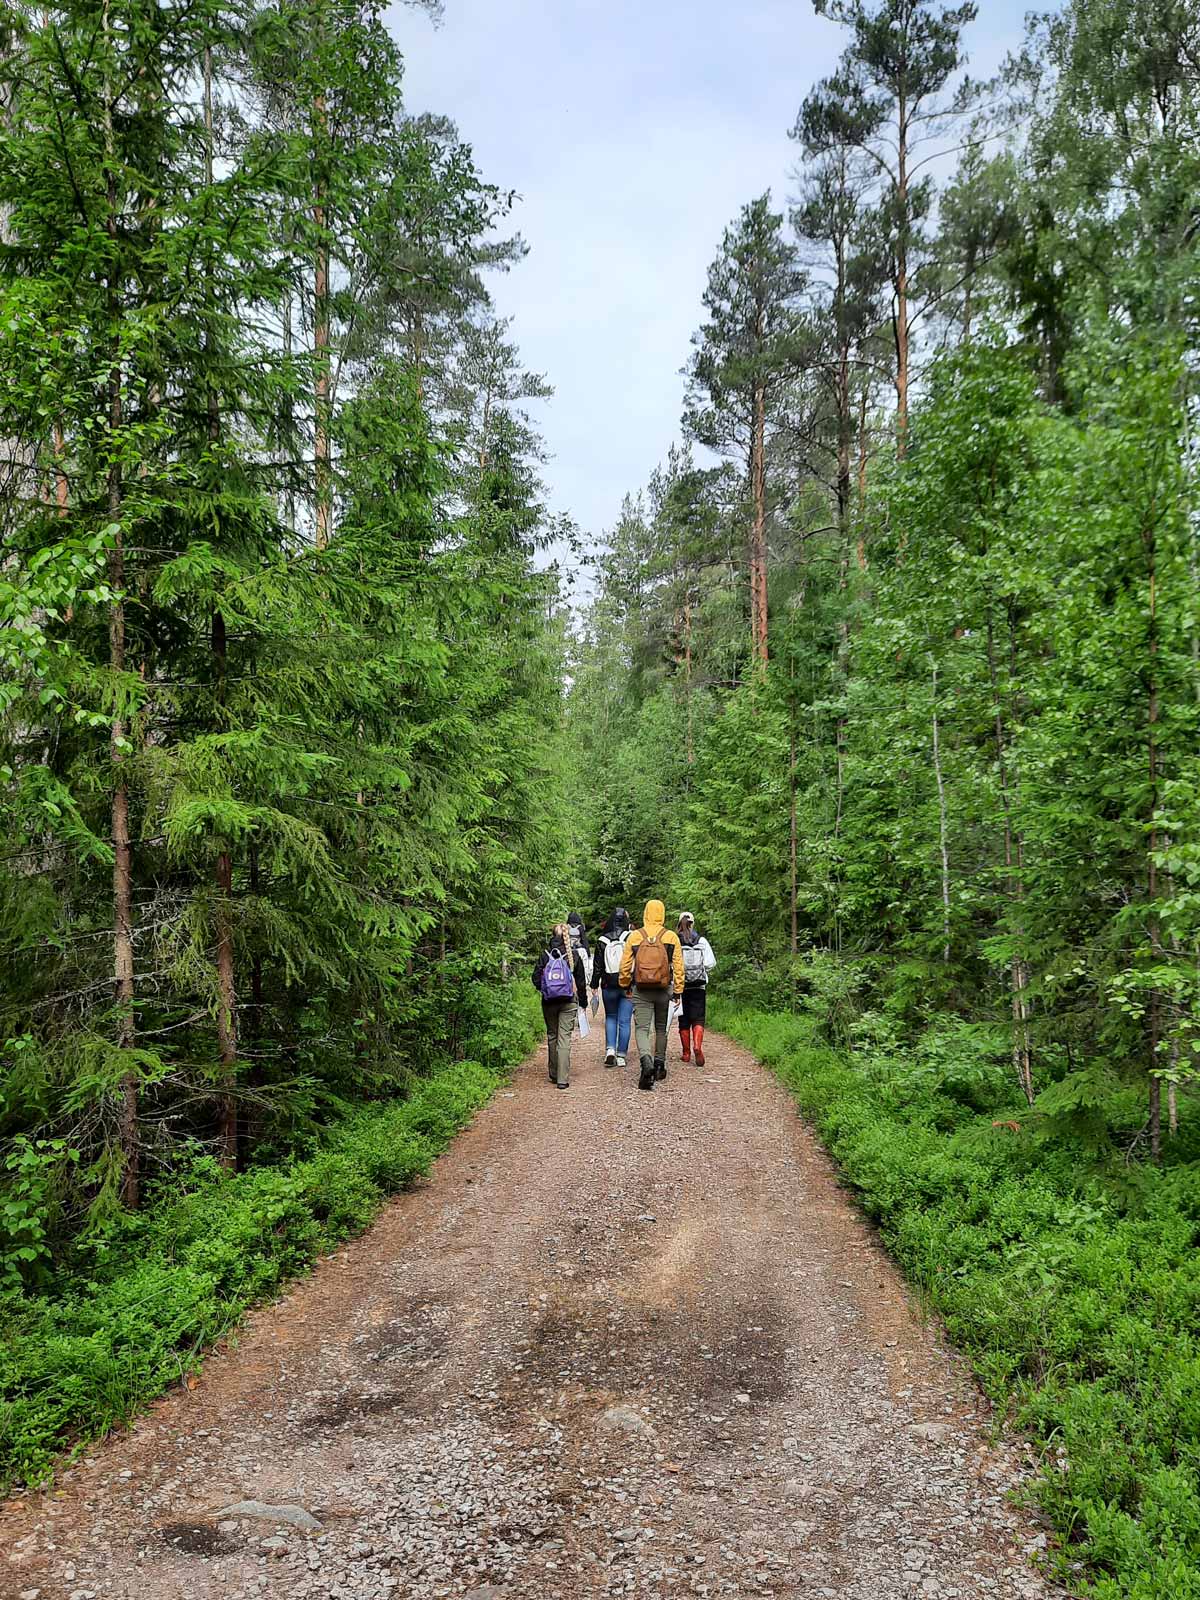 Forest excursion of a day camp for youths at Pinkjärvi in Eurajoki. Photo: Veera Virtanen